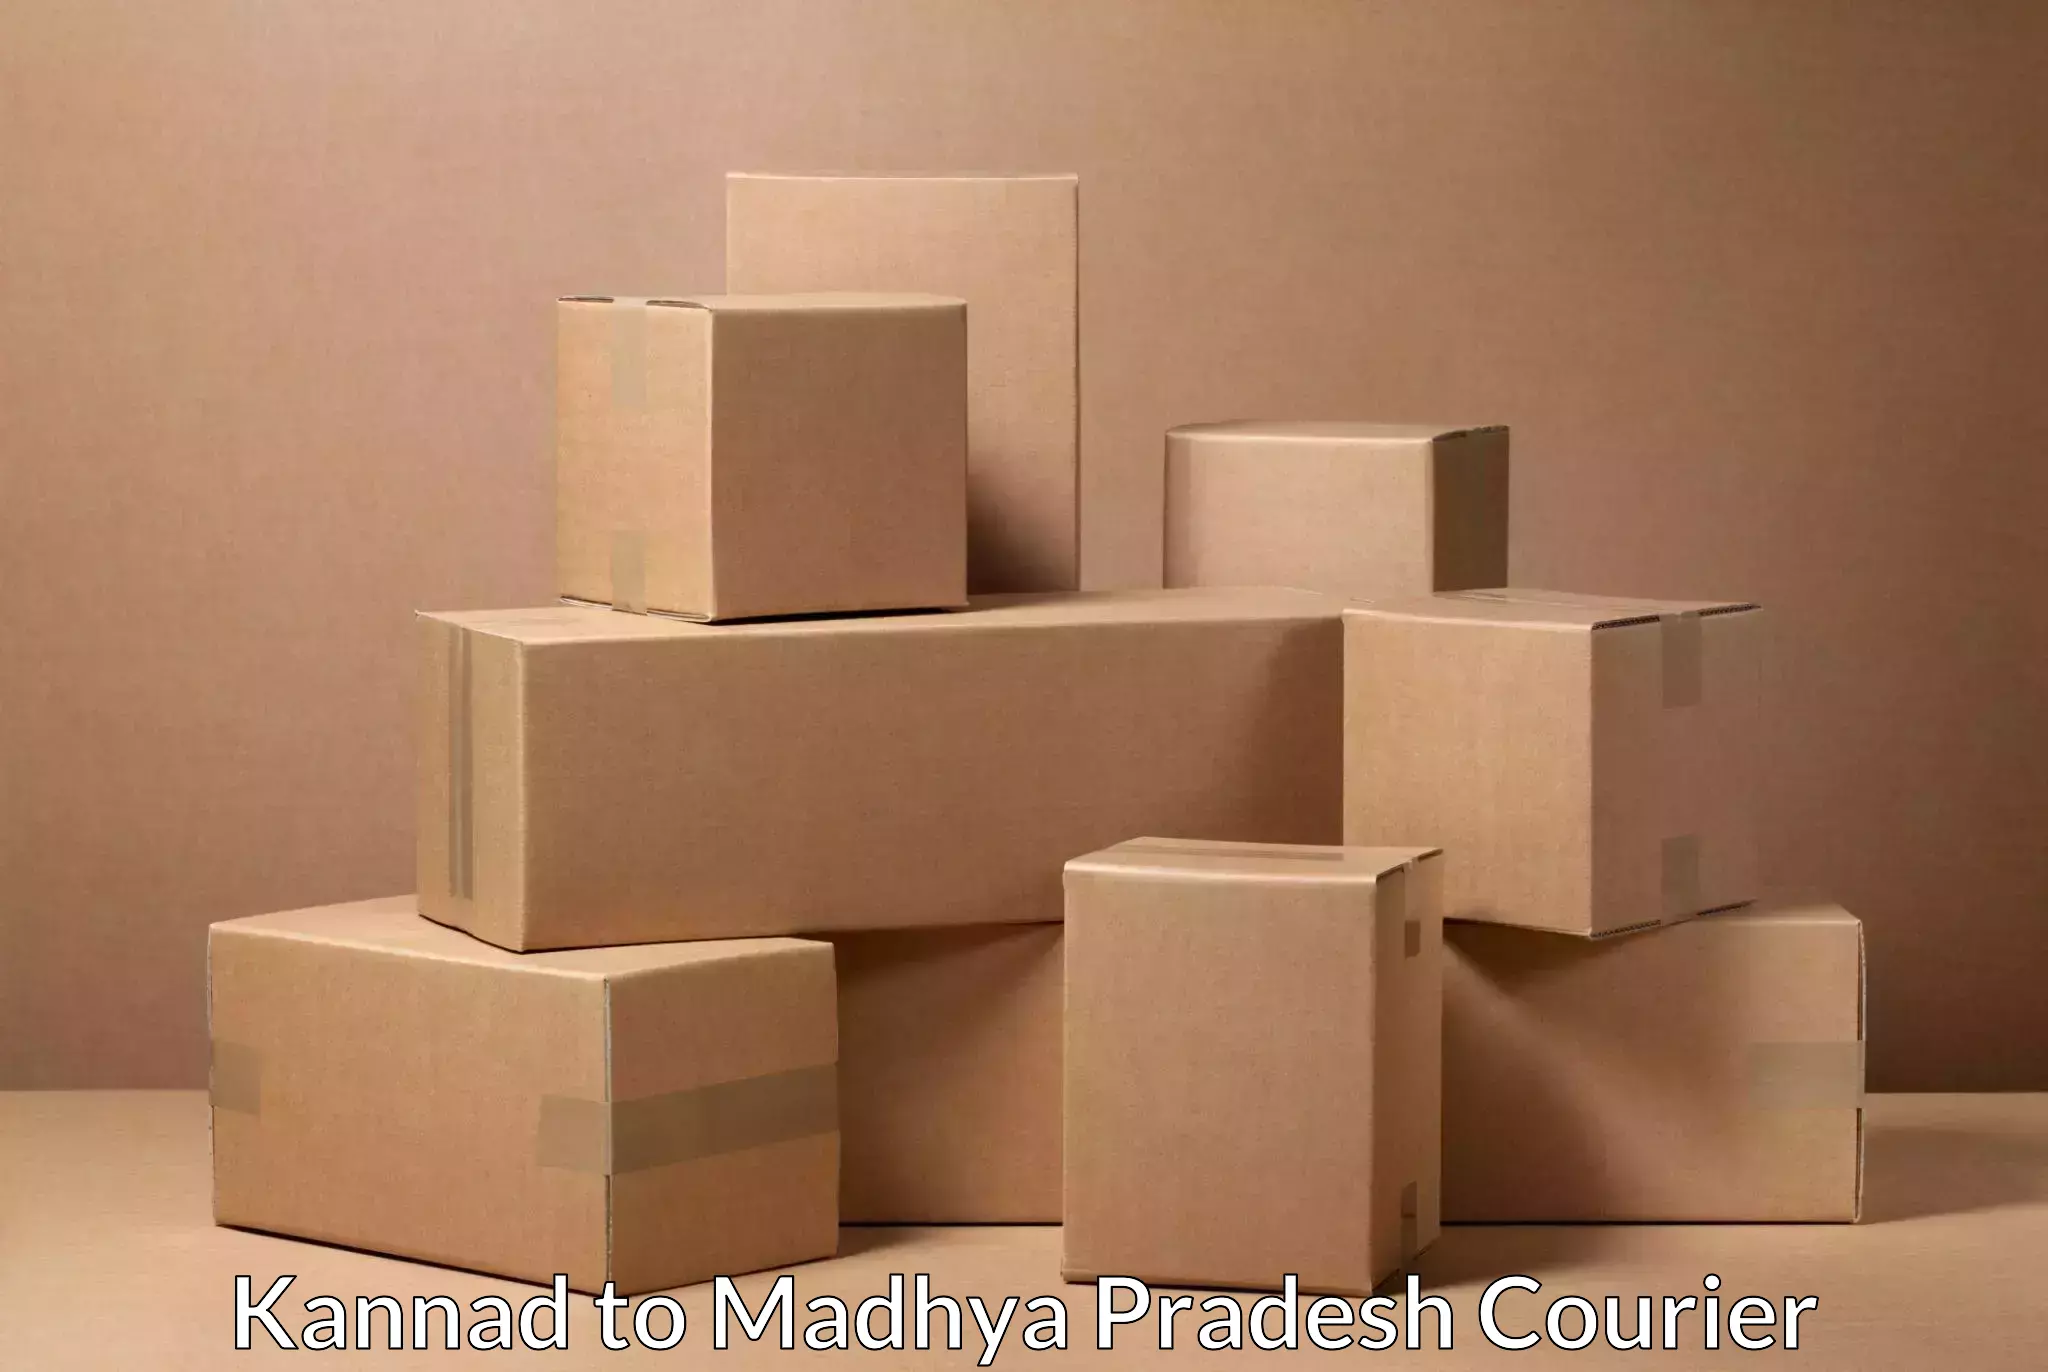 Cost-effective courier options Kannad to Neemuch